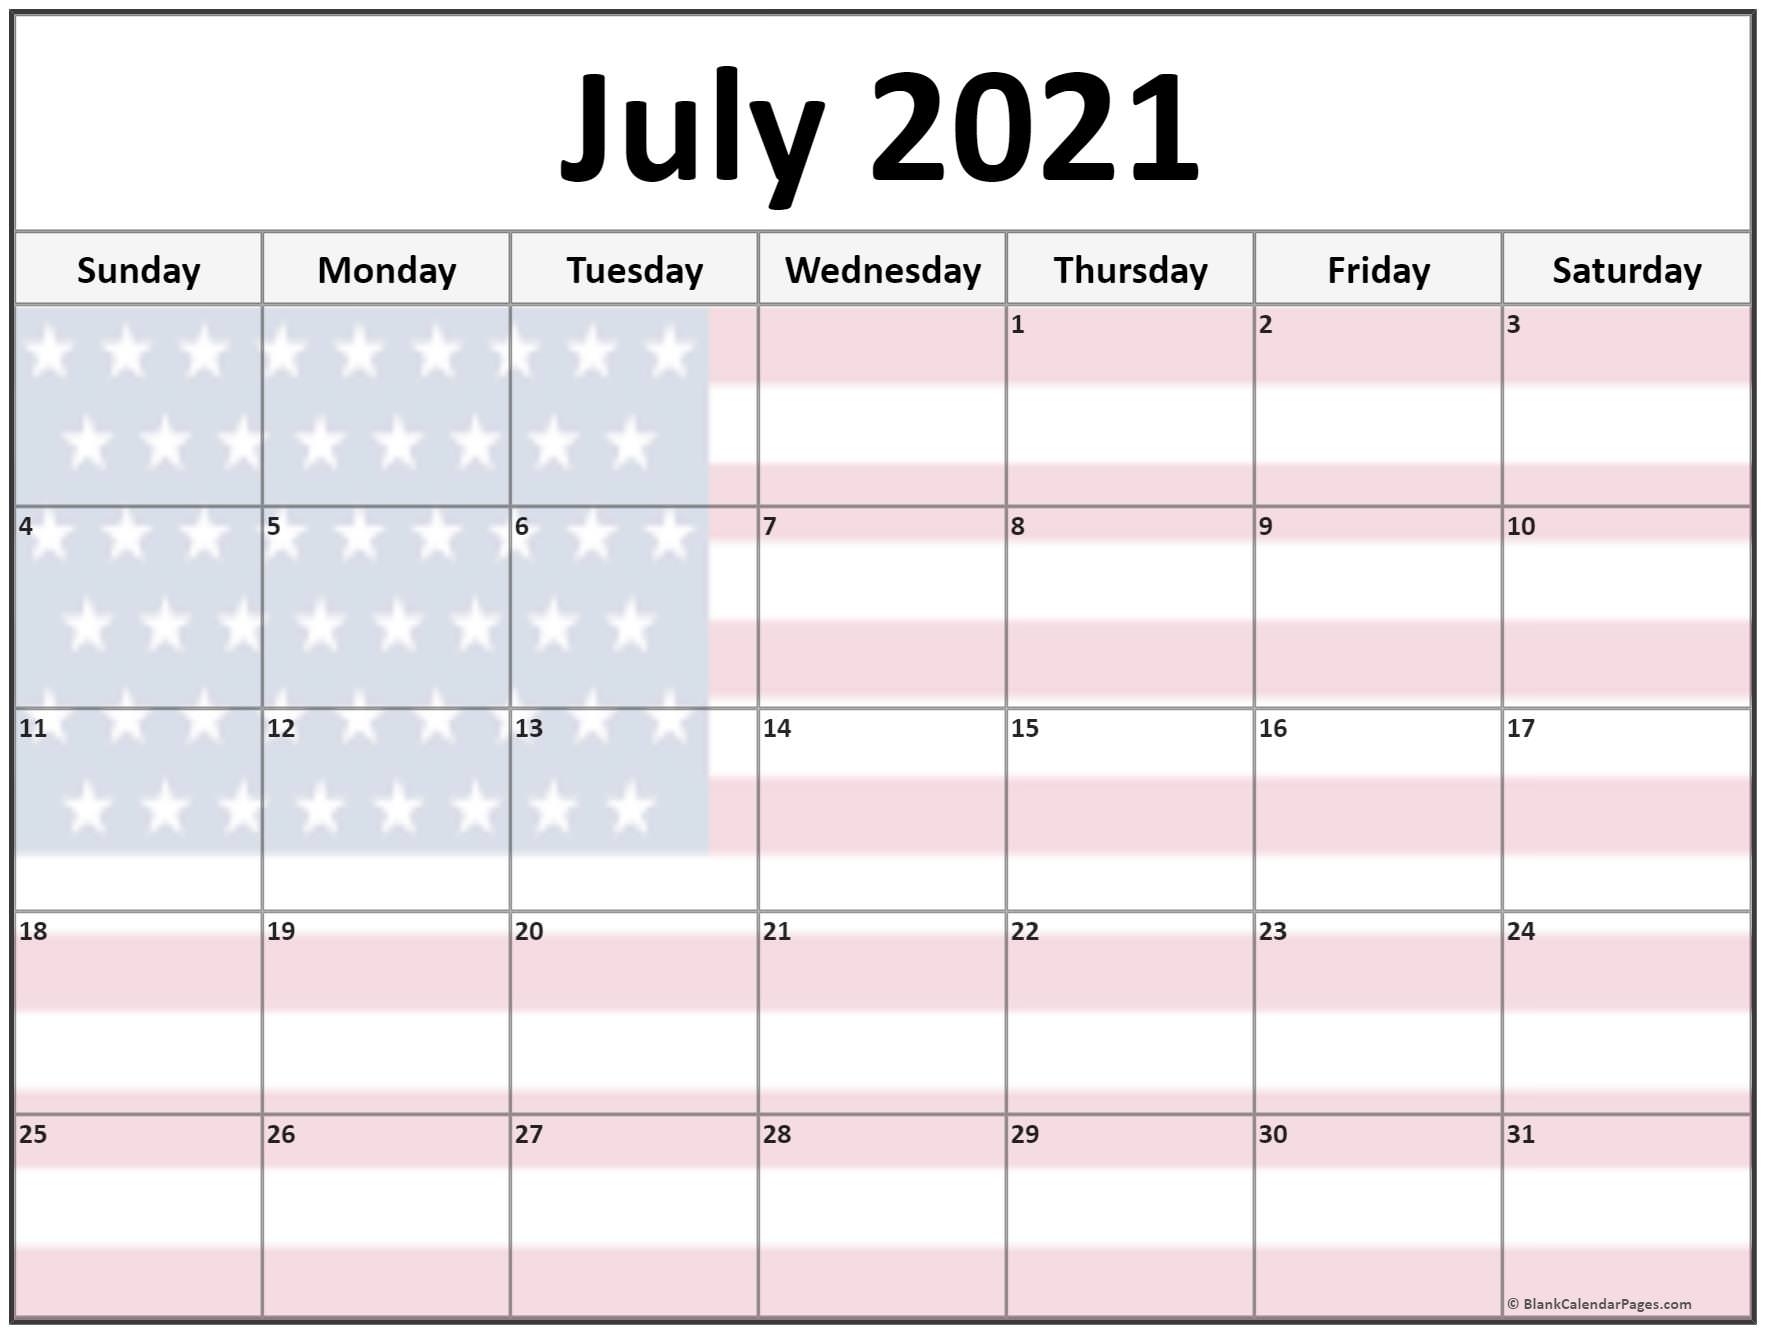 Collection Of July 2021 Photo Calendars With Image Filters. Picture Of July 2021 Calendar